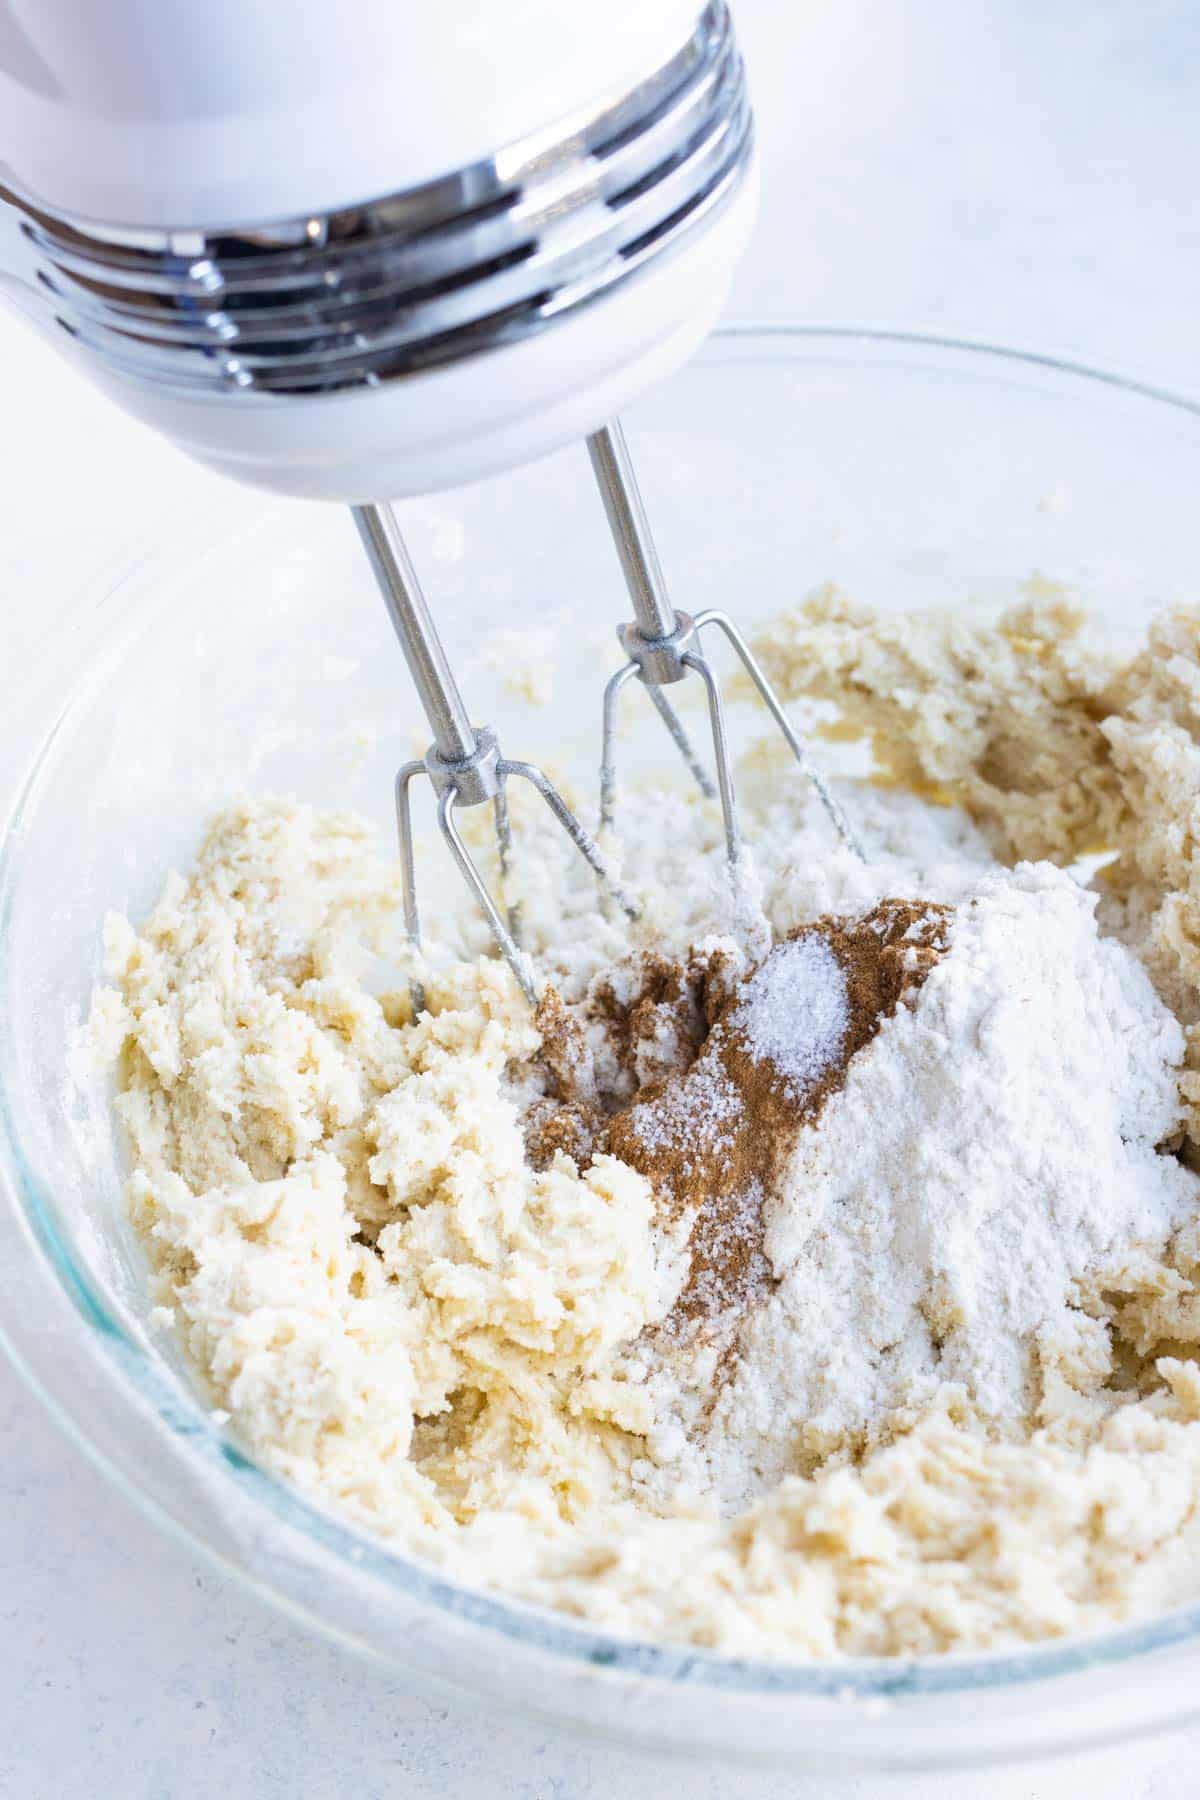 Flour is added to the sugar mixture.